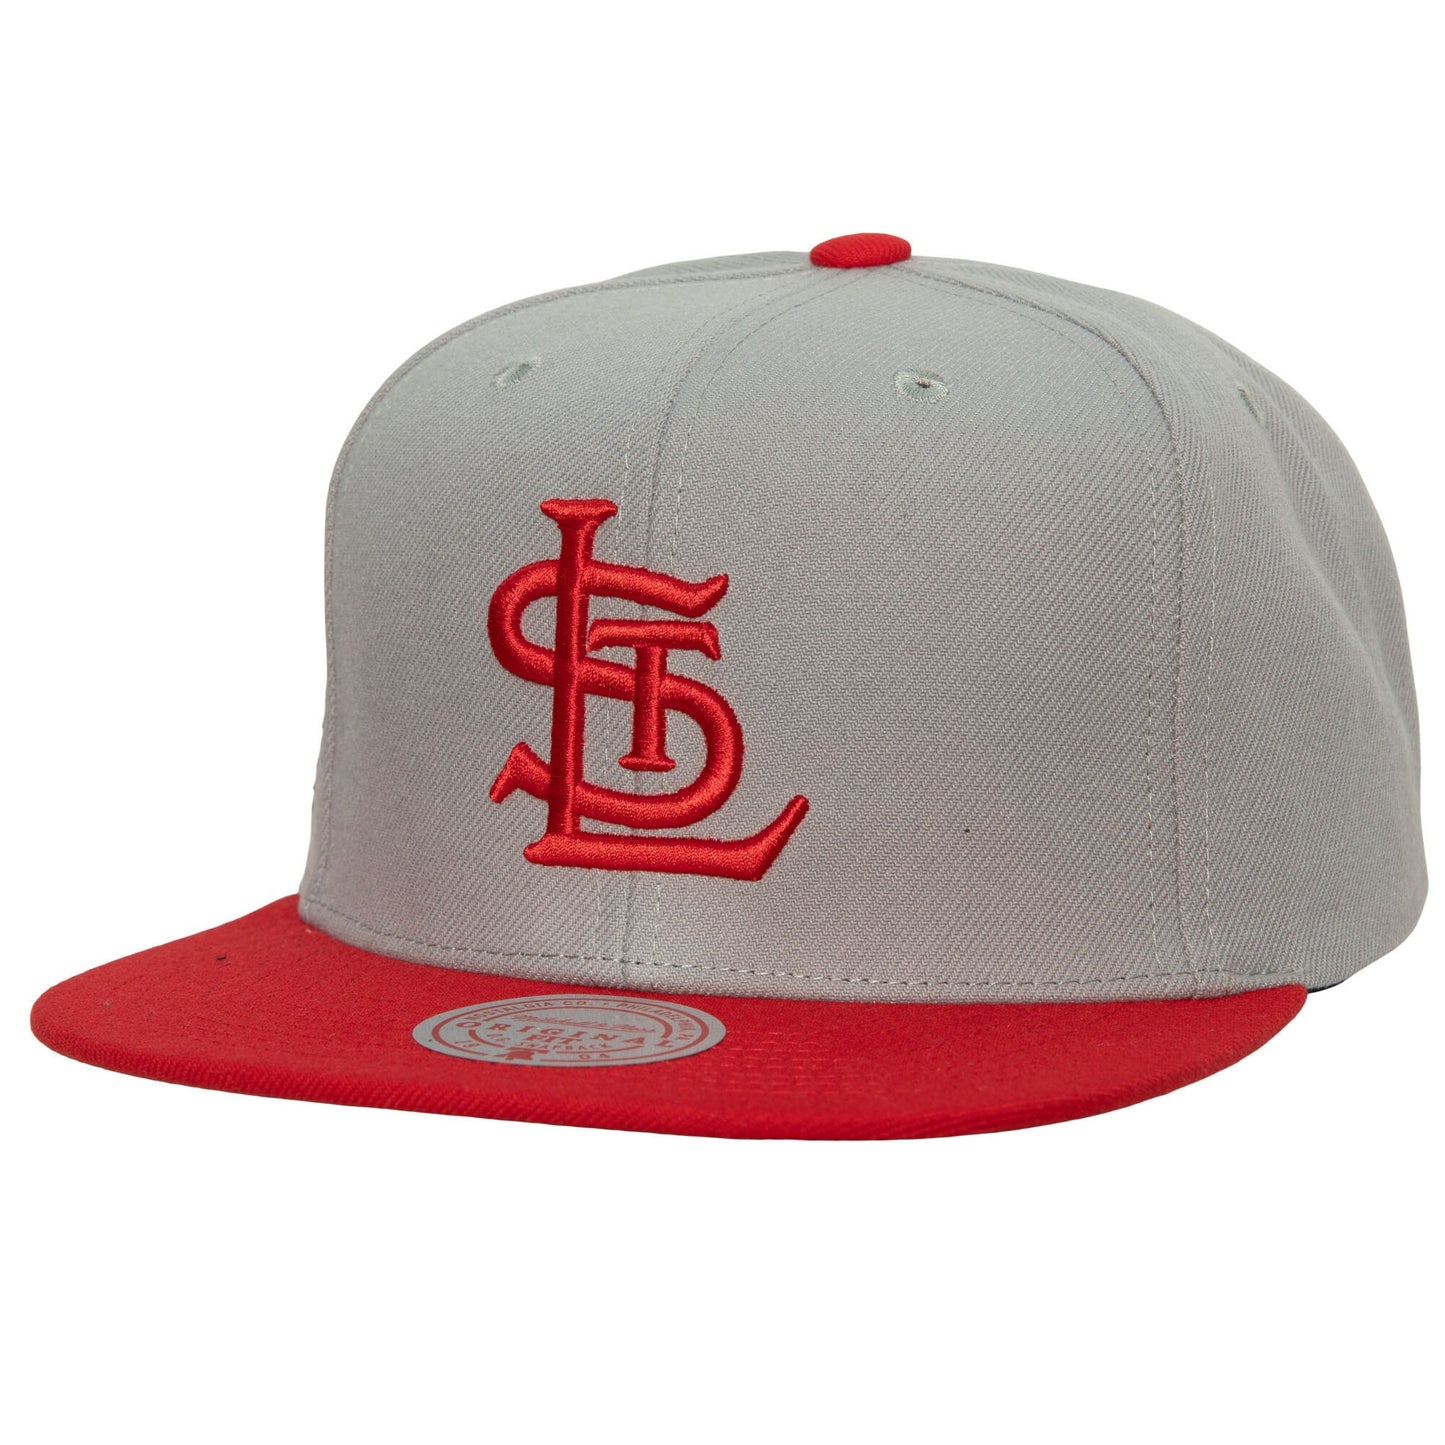 St. Louis Cardinals Mitchell & Ness Cooperstown Collection Away Snapback Hat - Gray